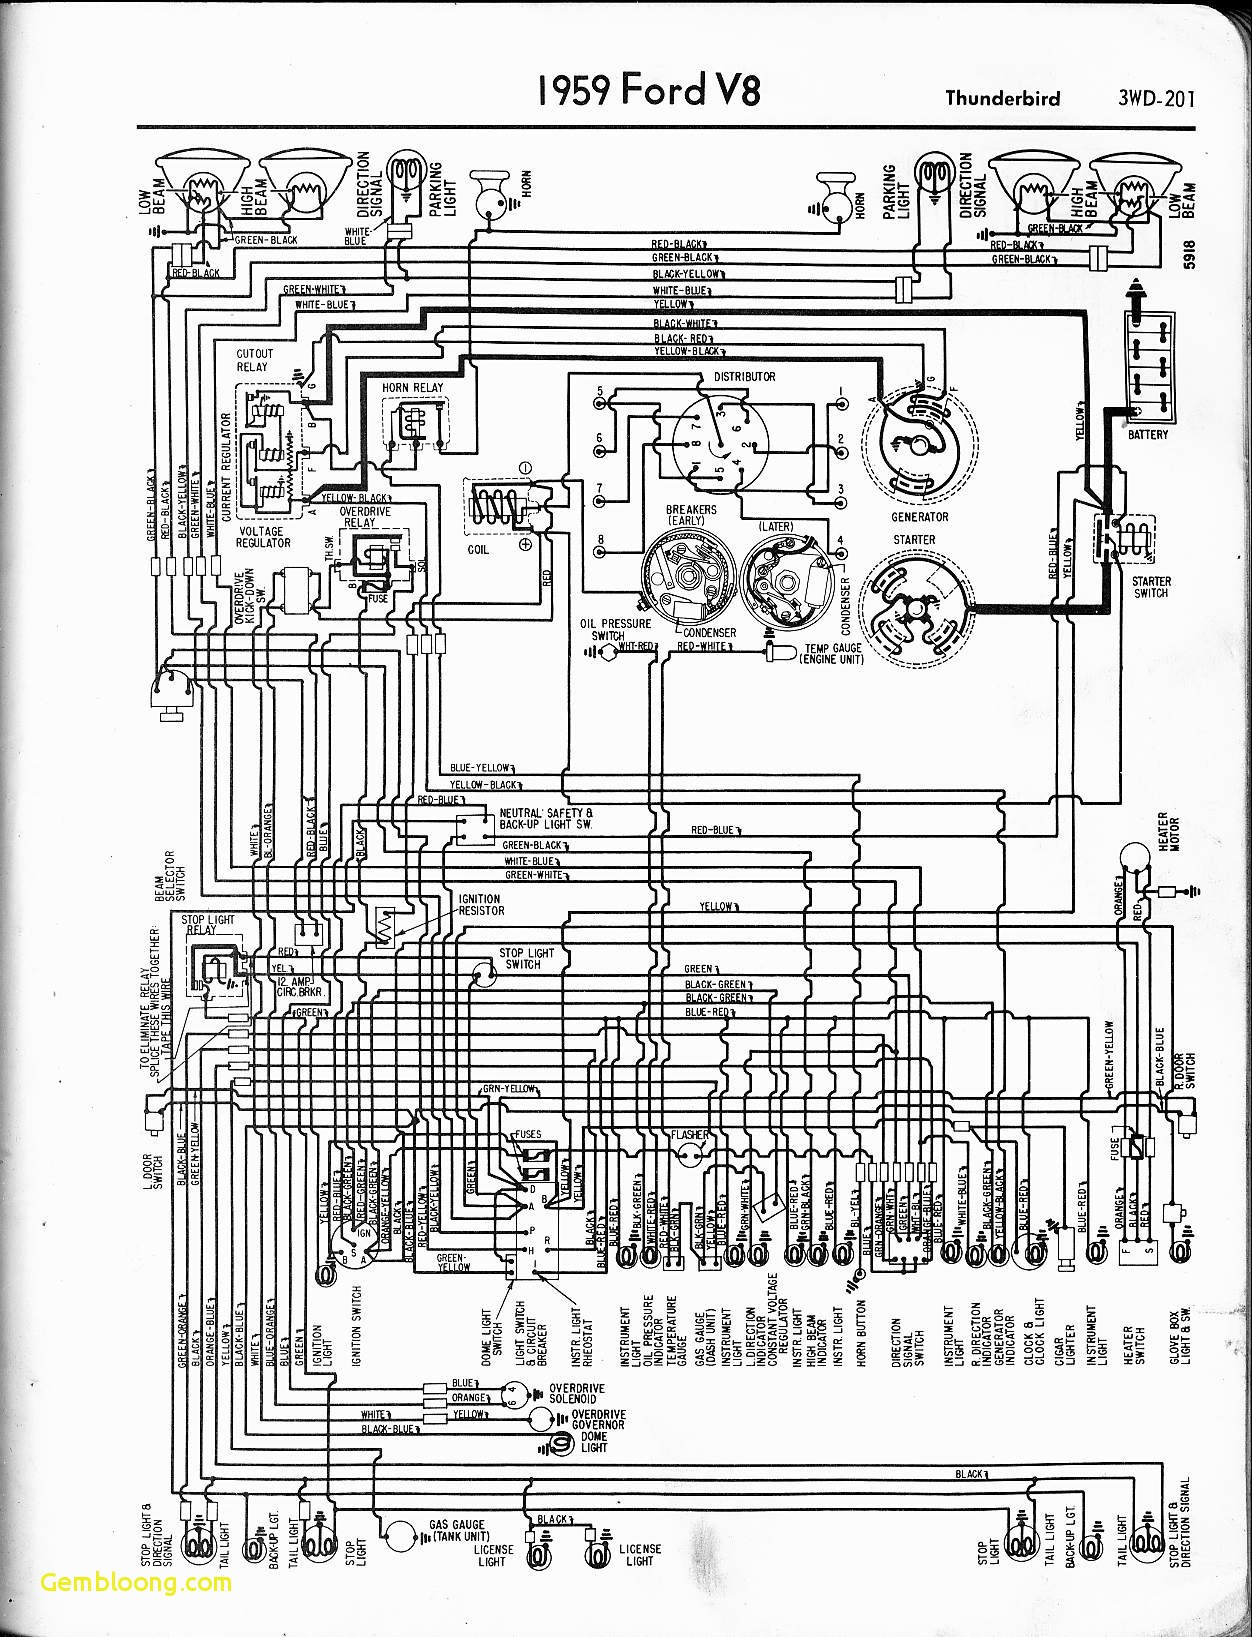 Engine Diagrams for Cars Download ford Trucks Wiring Diagrams ford F150 Wiring Diagrams Best Of Engine Diagrams for Cars